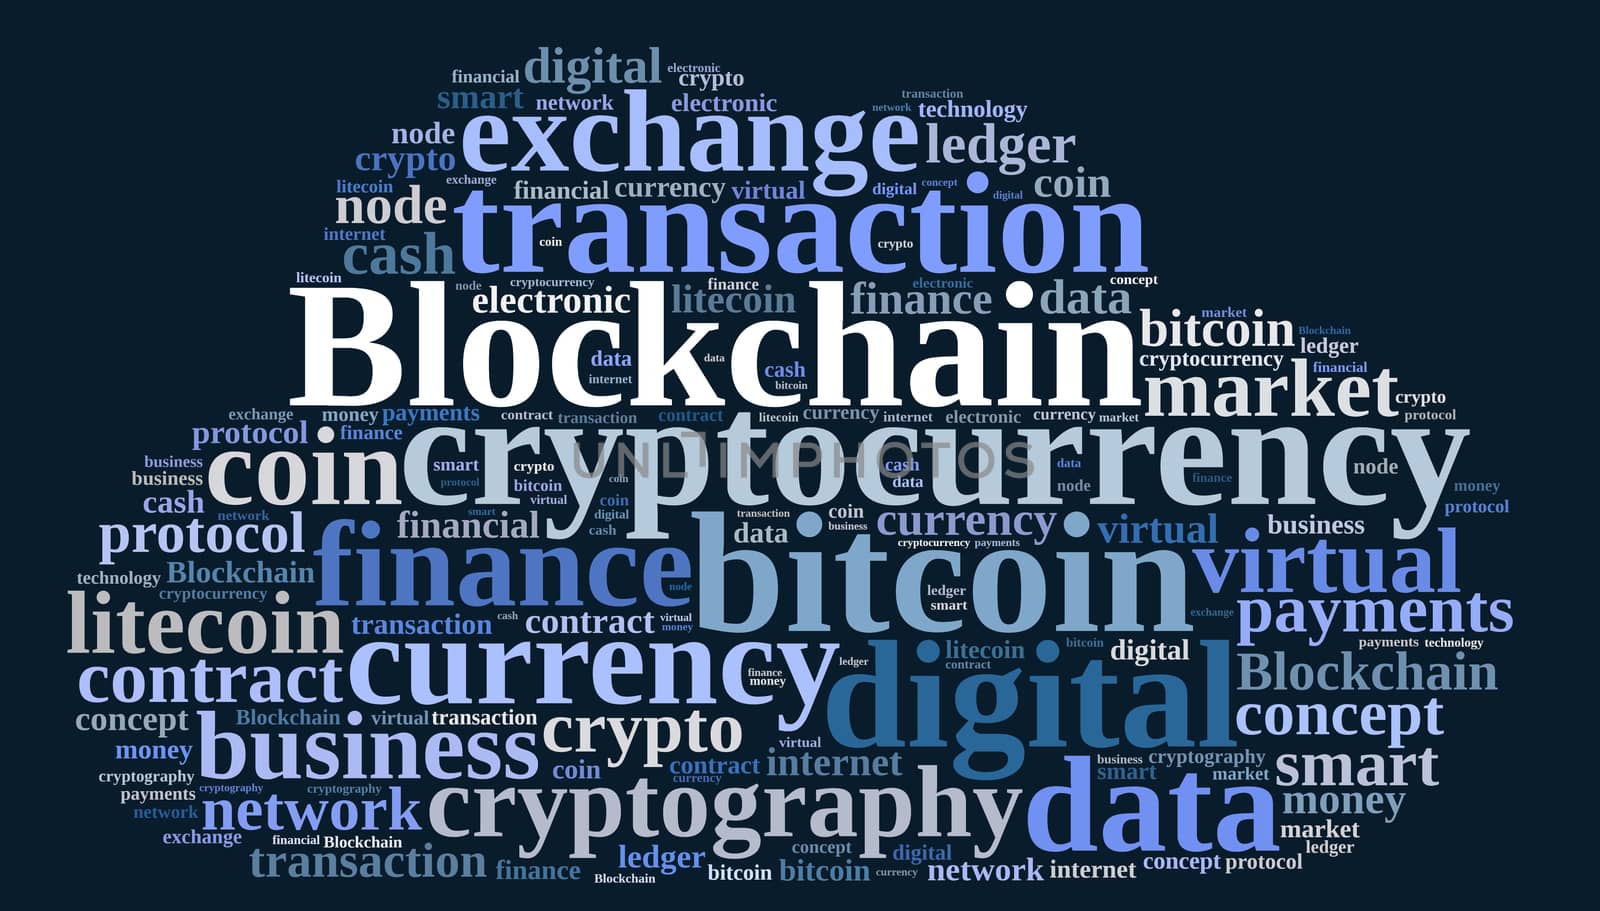 Illustration with word cloud with the word Blockchain.